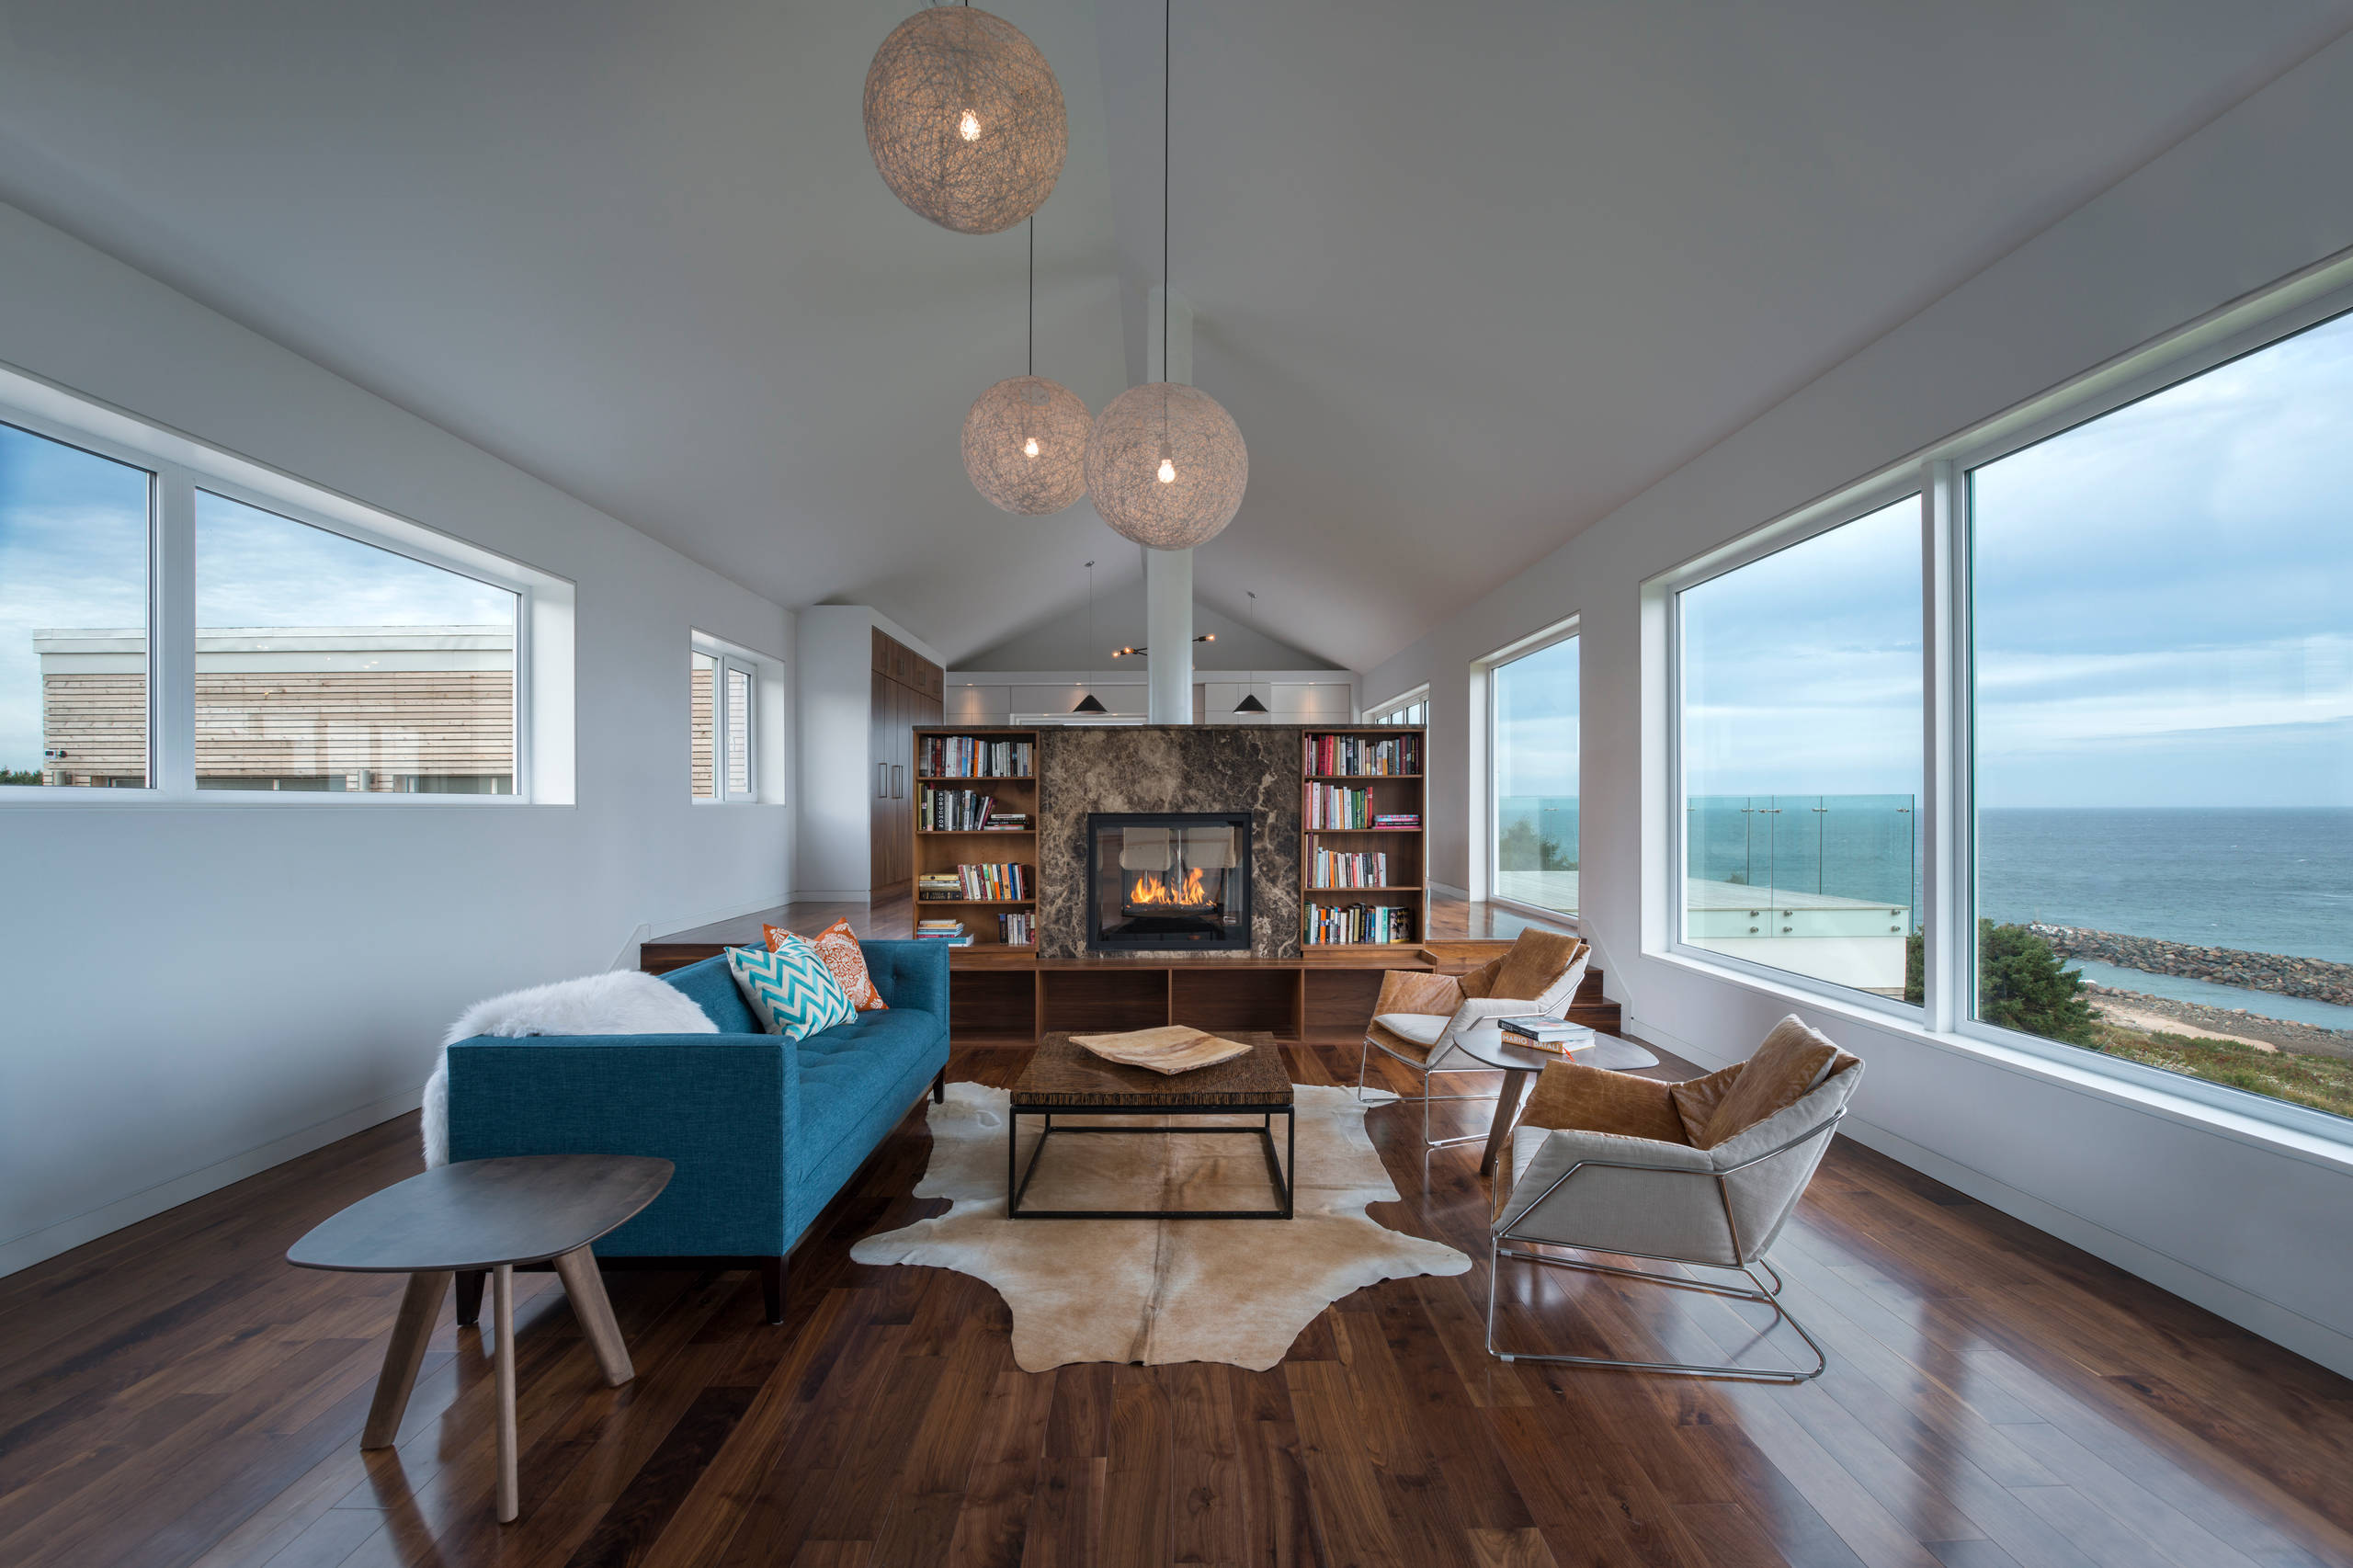 Jill Greaves Design in collaboration with Omar Gandhi Architect.  A multi-level, residential retreat complete with full-length cathedral ceiling, hardwood floors and panorama views.  A central hearth,